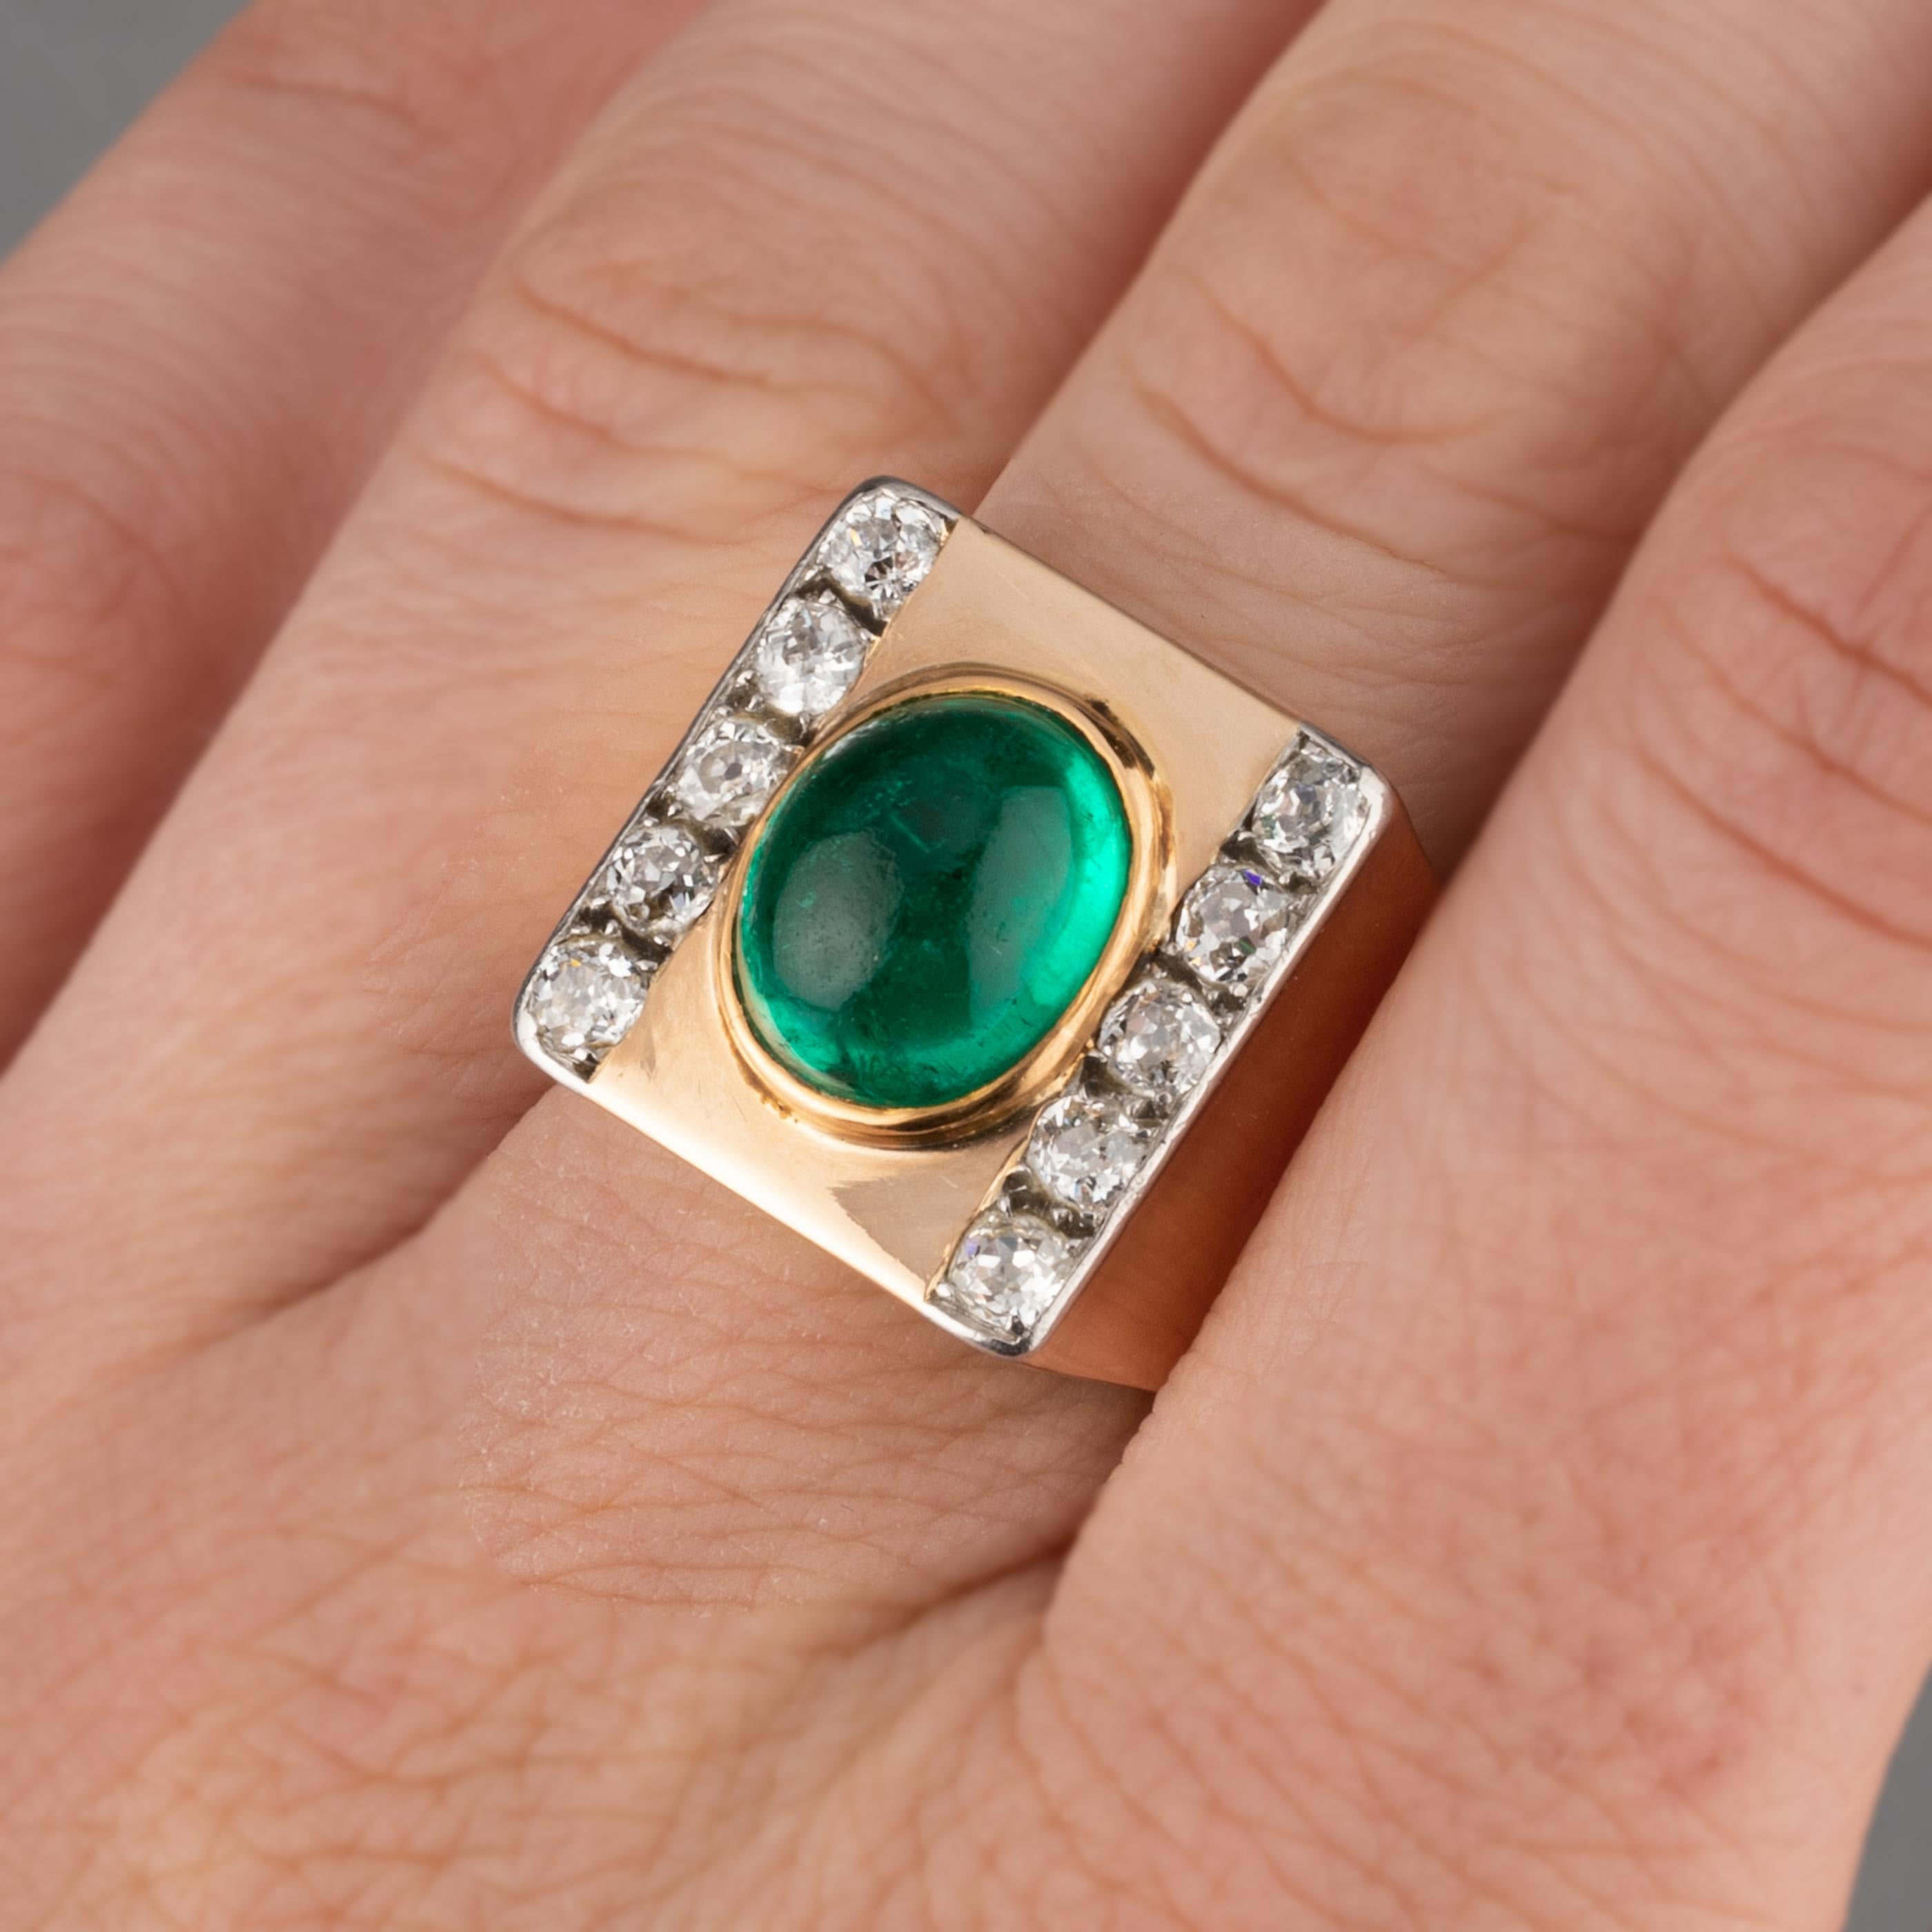 Very beautiful vintage ring, made in France circa 1940.

The ring has presence, elegant and fashion. 
The central emerald weights 4 carats estimate. The color is intense and the stone is very clear. Probably from Colombia.
Surround by 10 diamonds